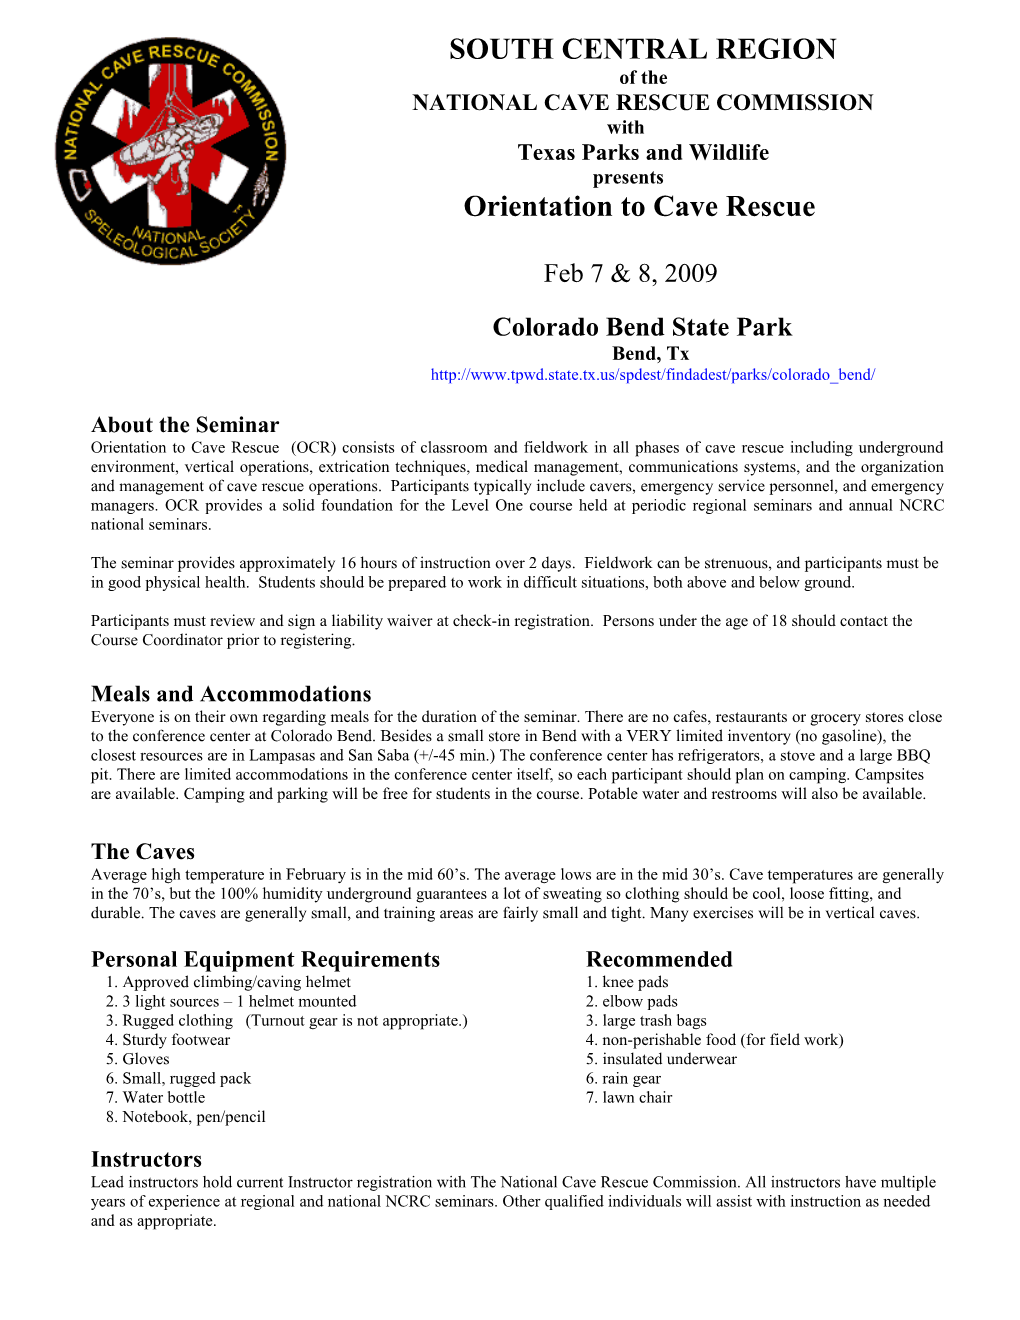 National Cave Rescue Commission